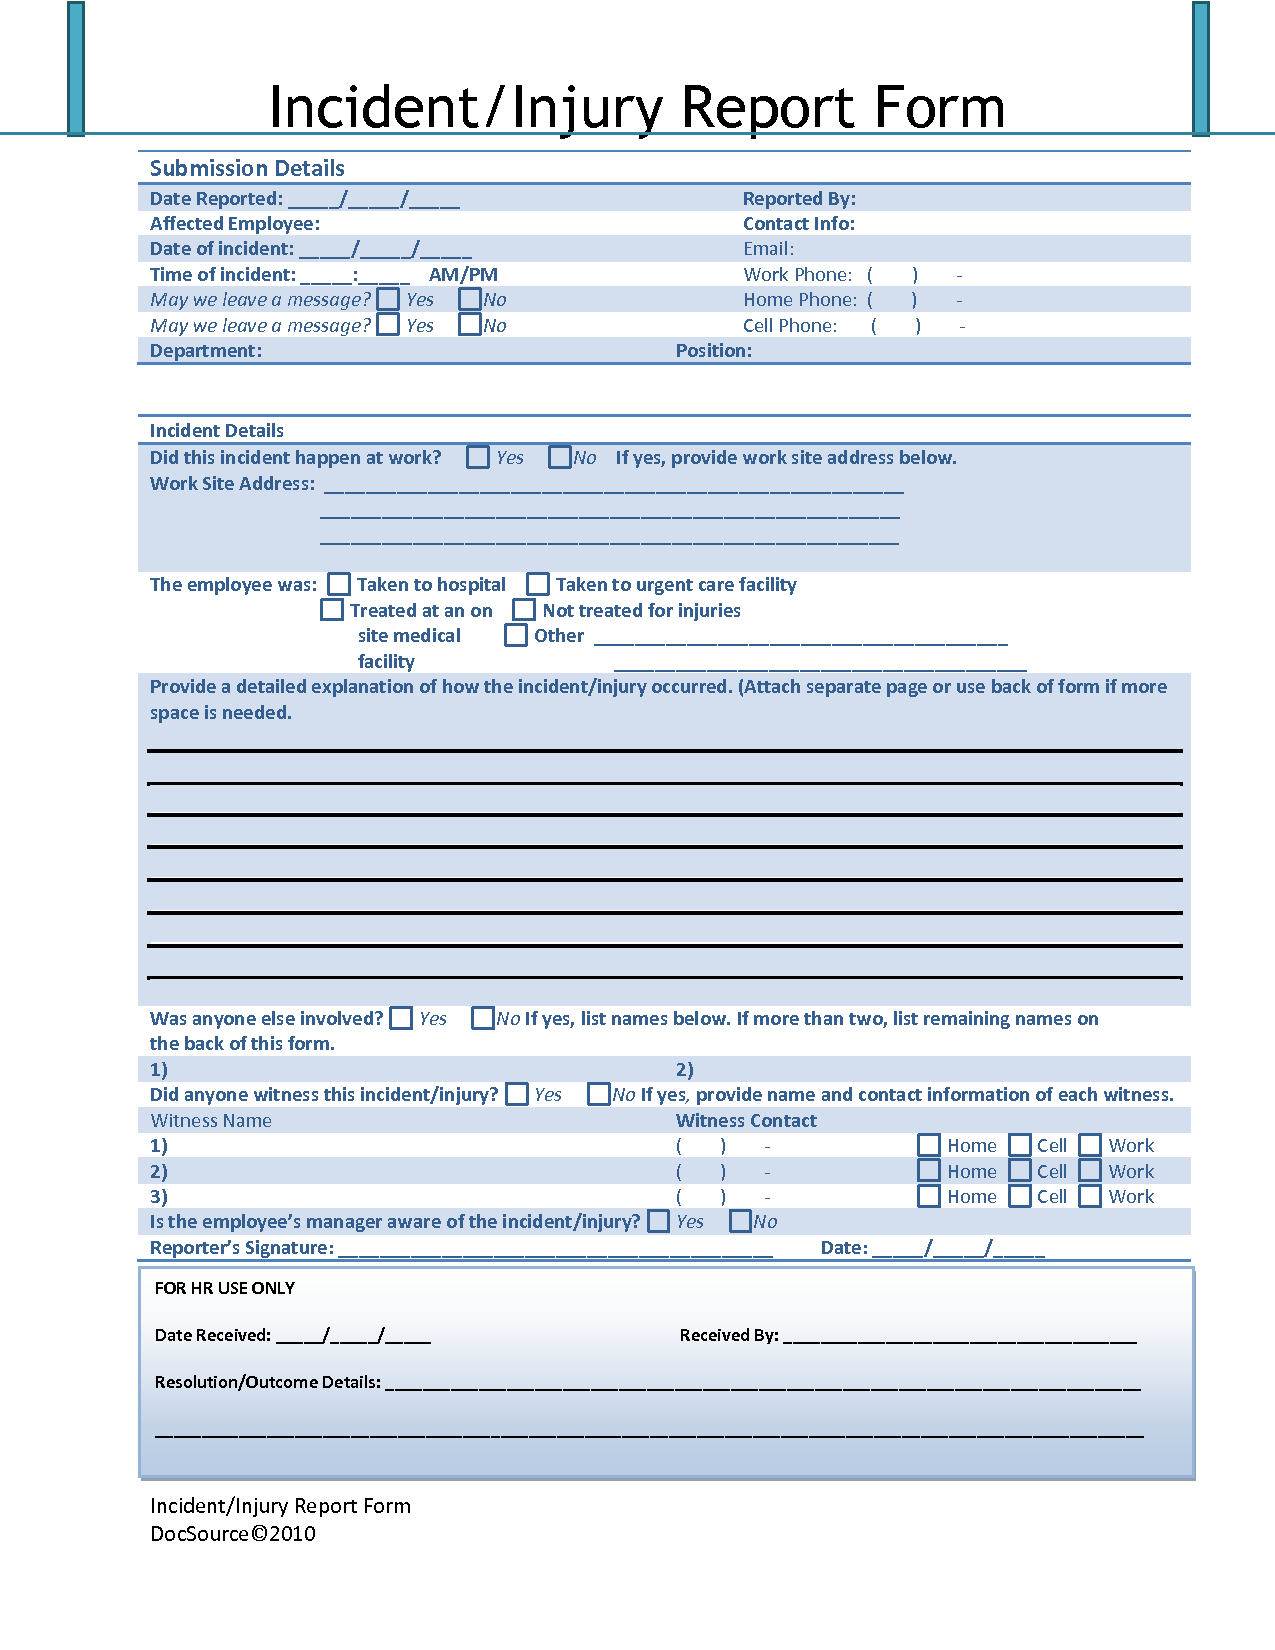 Effective Accident Injury Report Form Template With Blue Pertaining To Injury Report Form Template